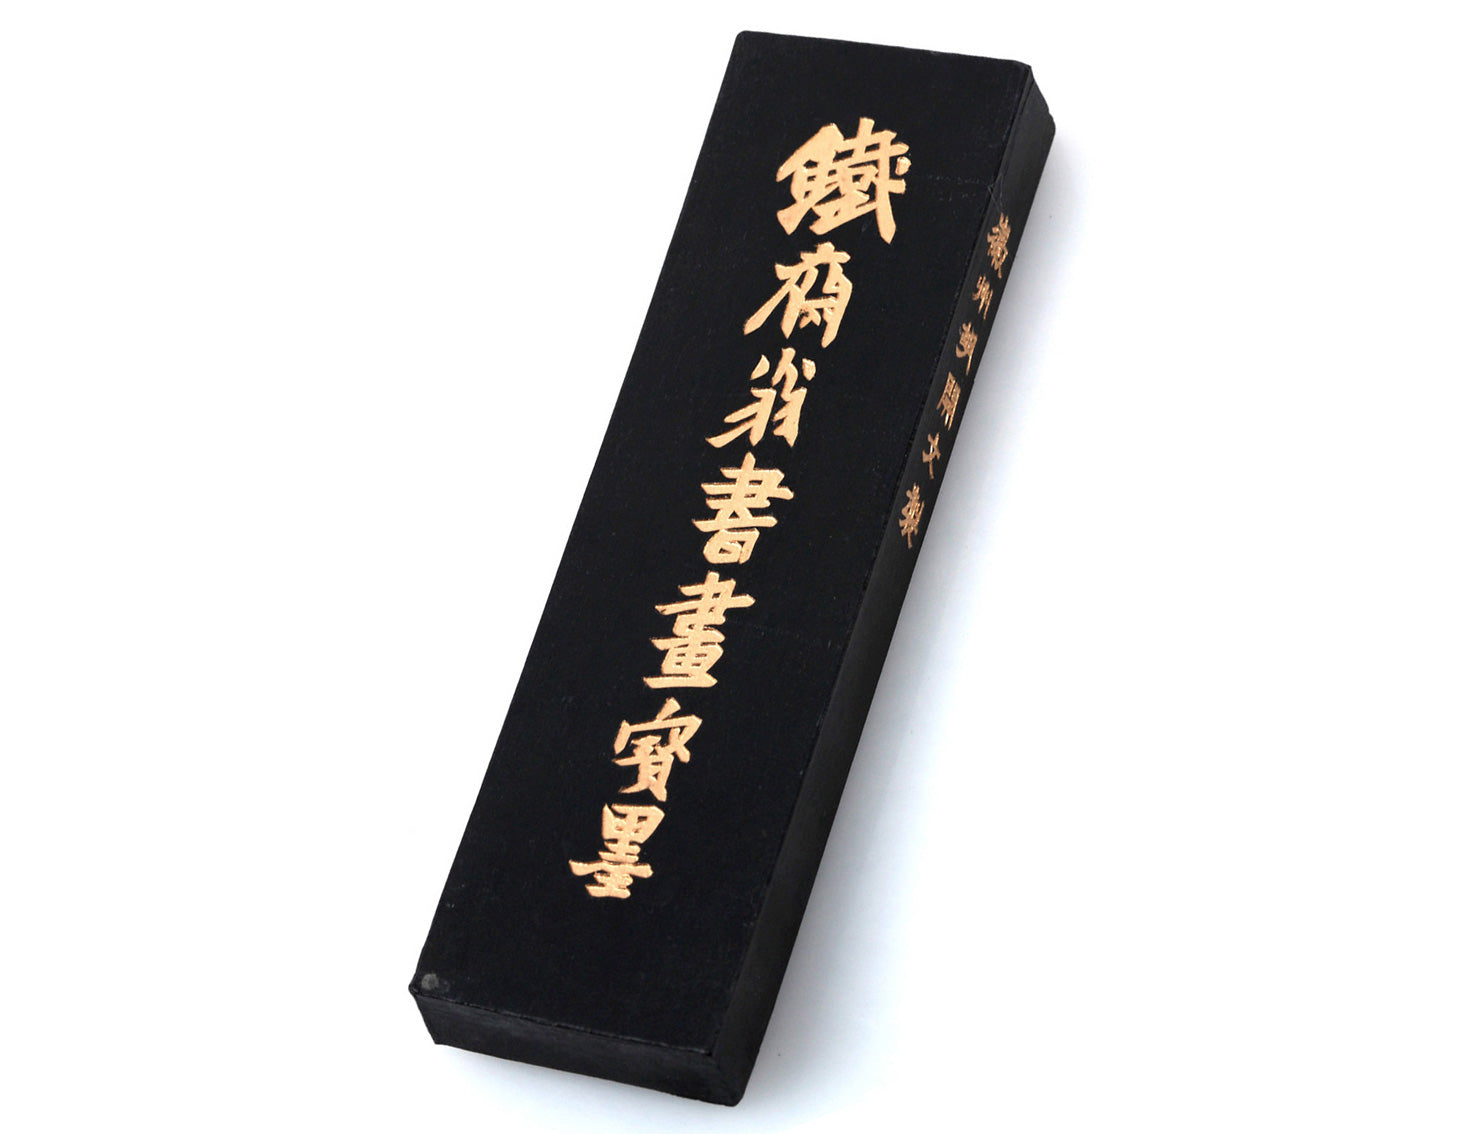 3 Pcs Chinese Calligraphic Black Ink Sticks w Silver Color Flower Char –  Golden Lotus Antiques